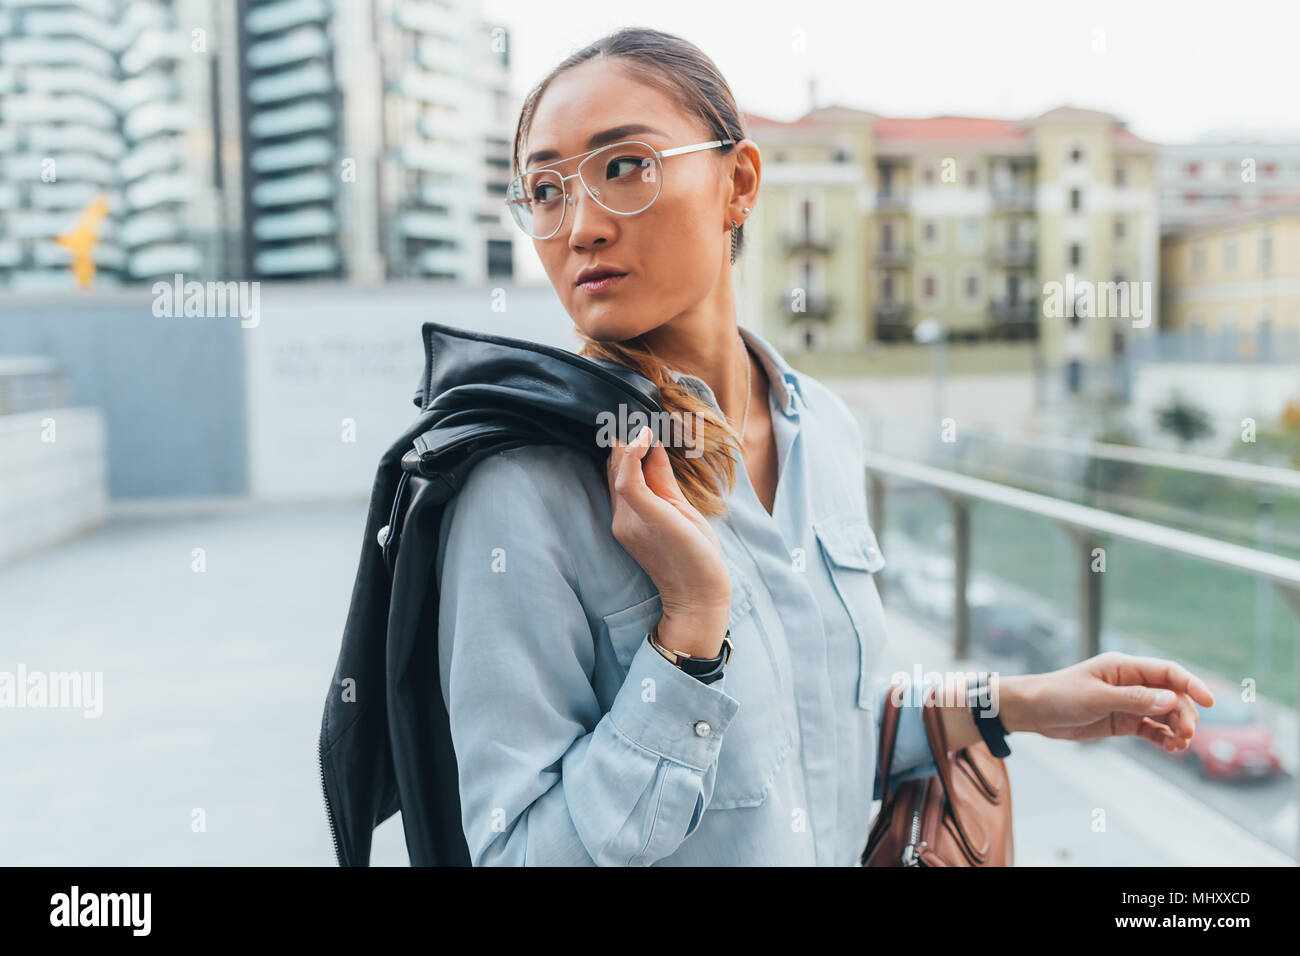 Portrait of businesswoman outdoors, carrying leather jacket over shoulder, looking away, pensive expression Stock Photo